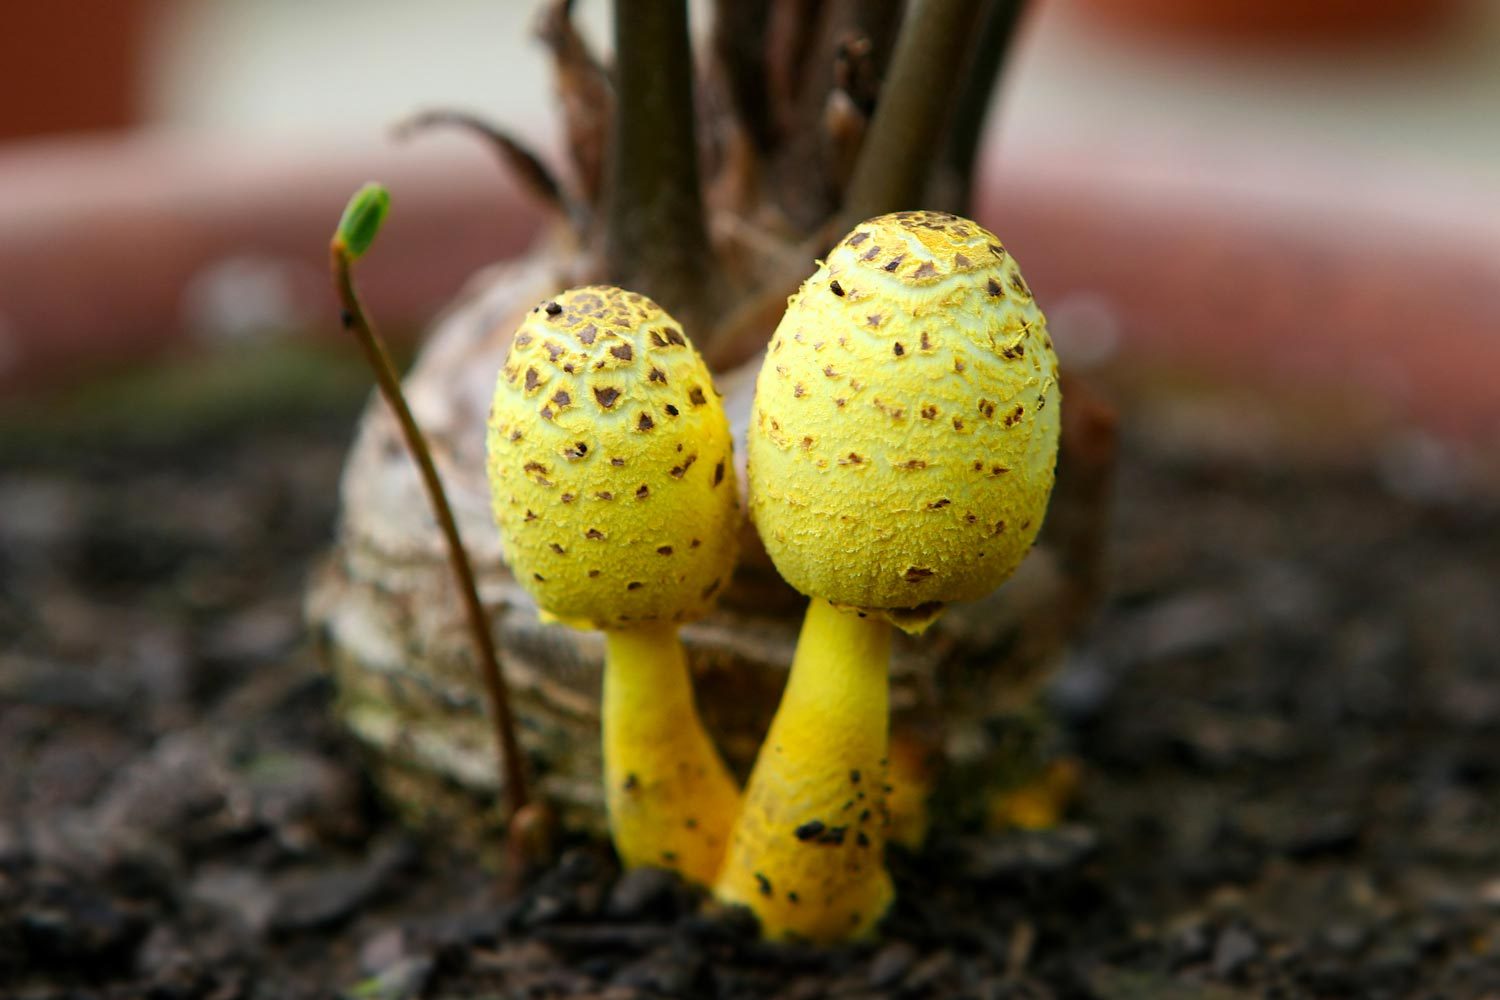 If You See a Yellow Mushroom in Your Houseplant, This Is What It Means